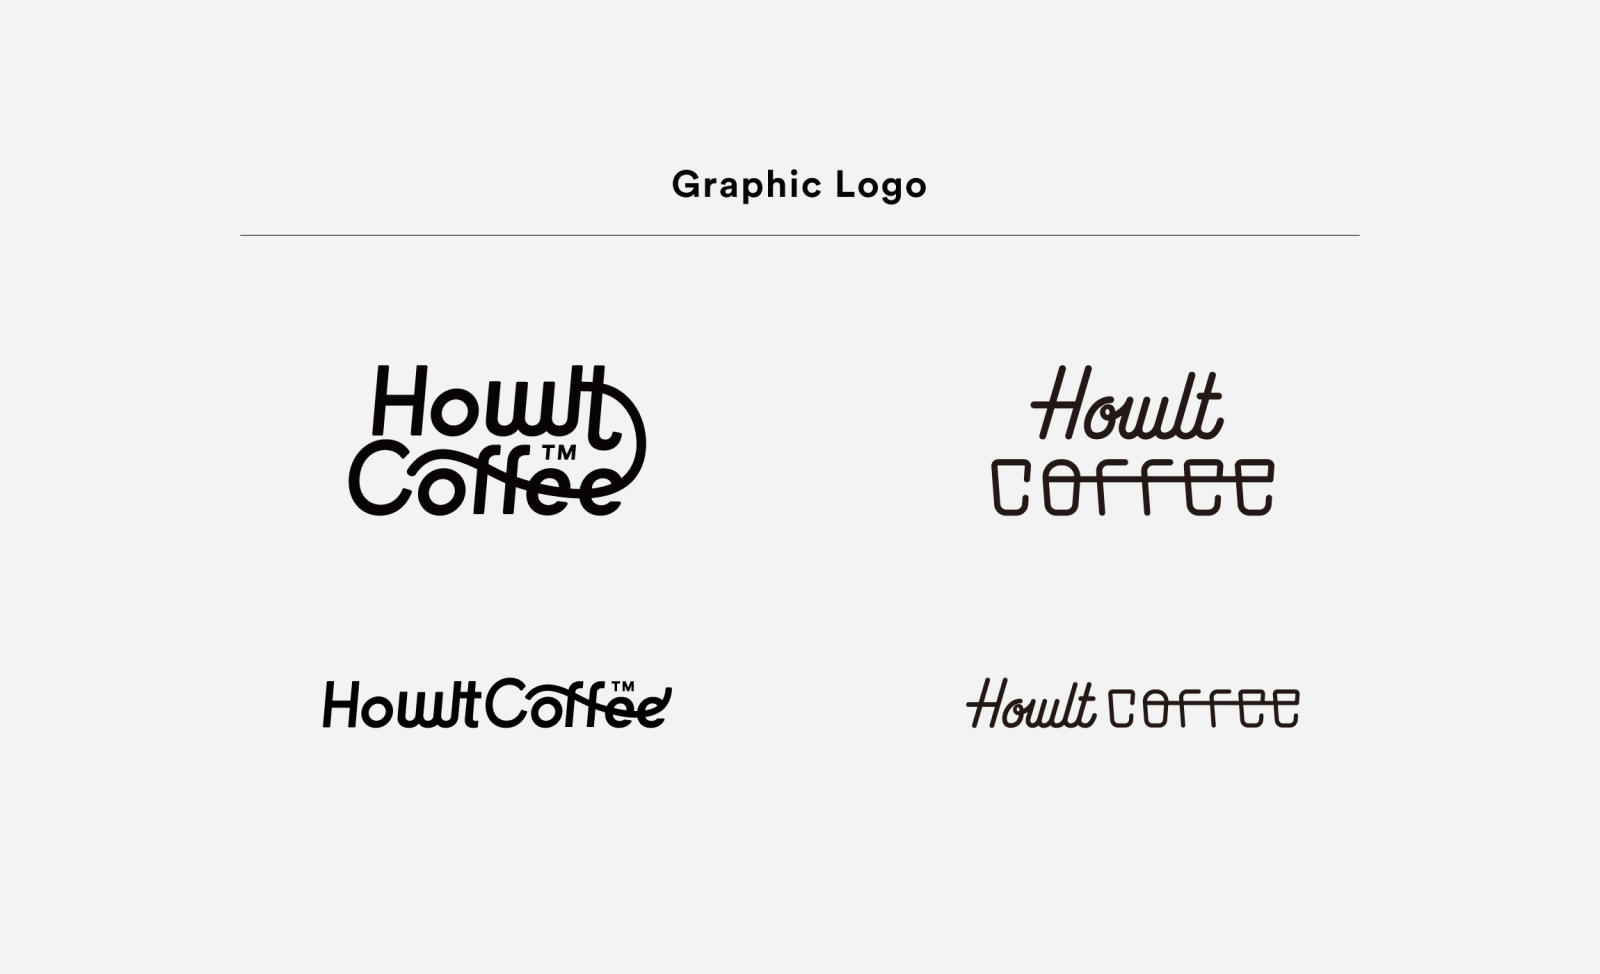 Howlt Coffee's Frafical Logo and Typeface